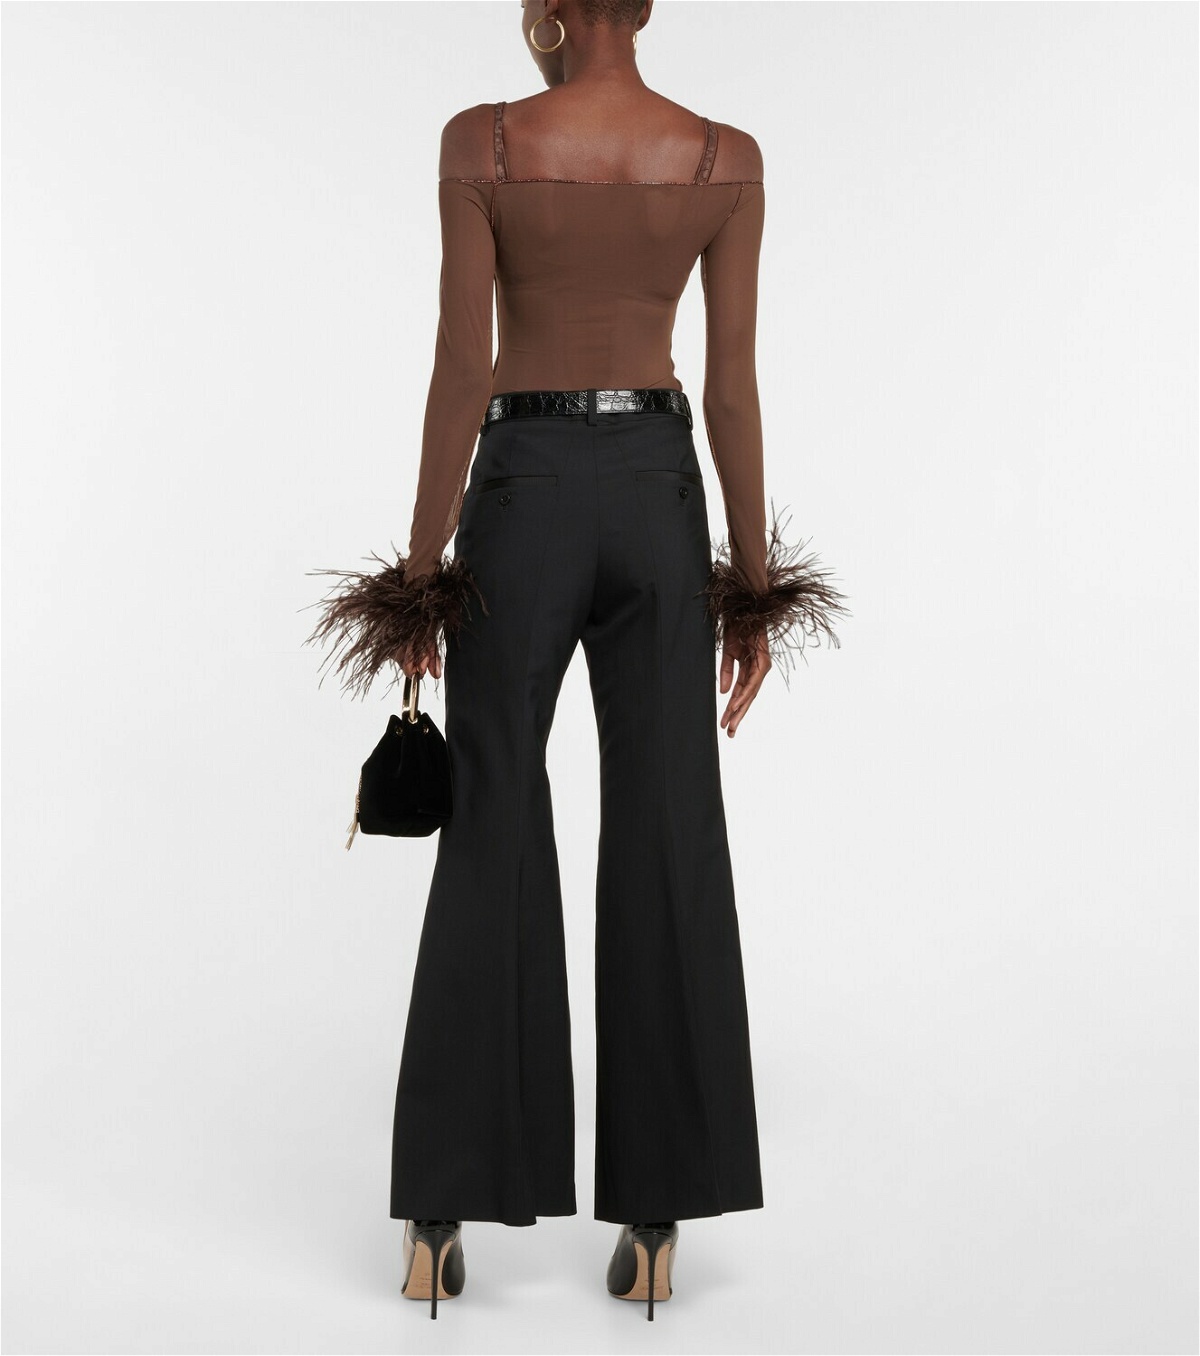 Oseree - Feather-trimmed mesh bodysuit